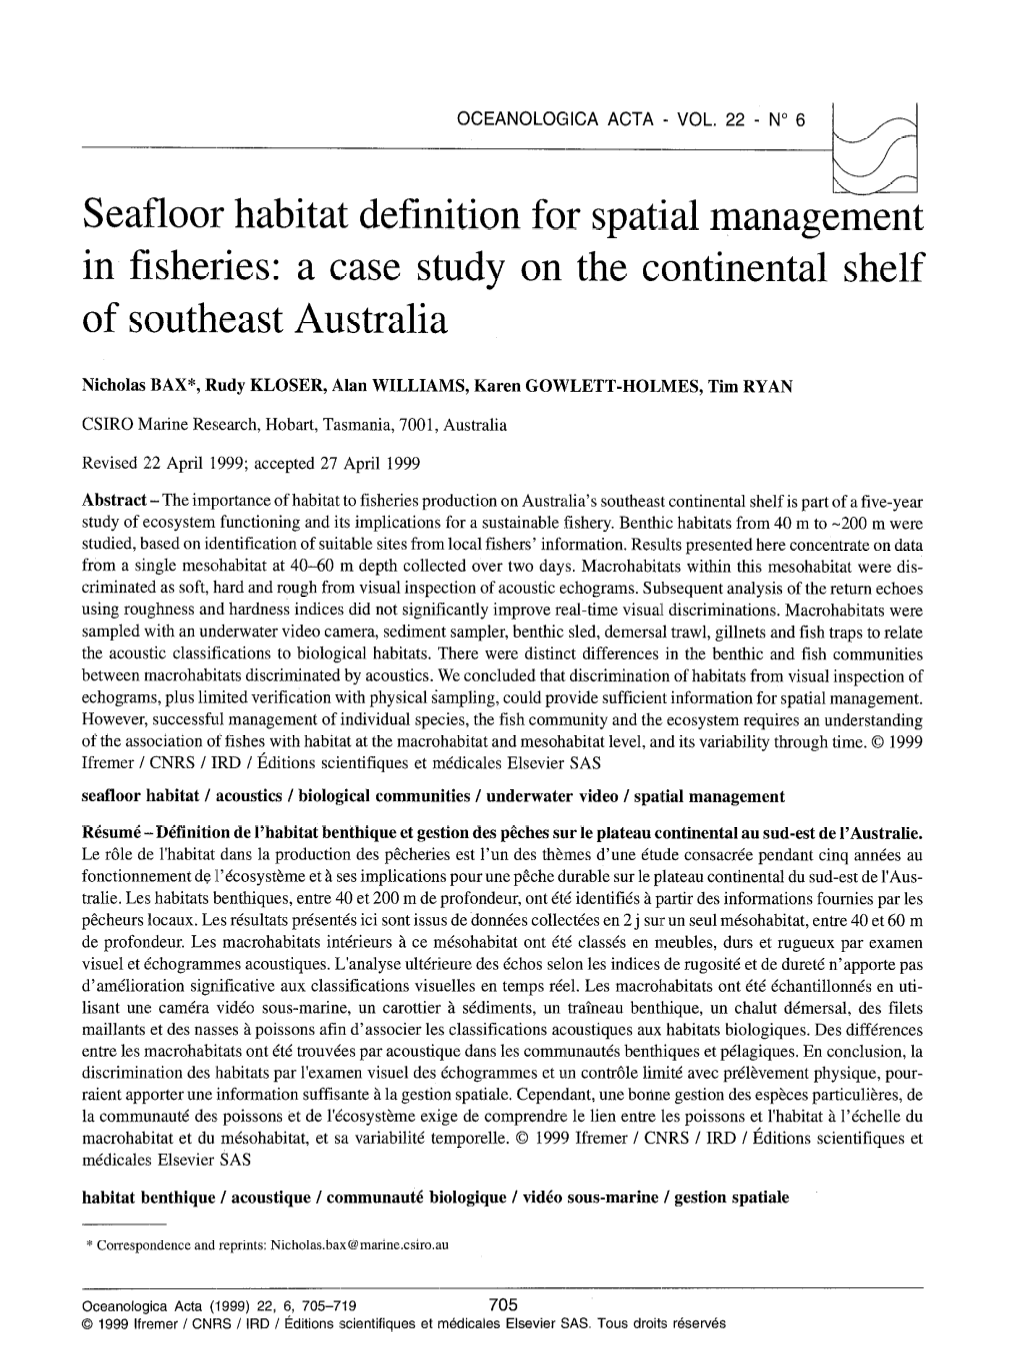 Seafloor Habitat Definition for Spat:Ial Management in Fisheries: a Case Study on the Continental Shelf of Southeast Australia